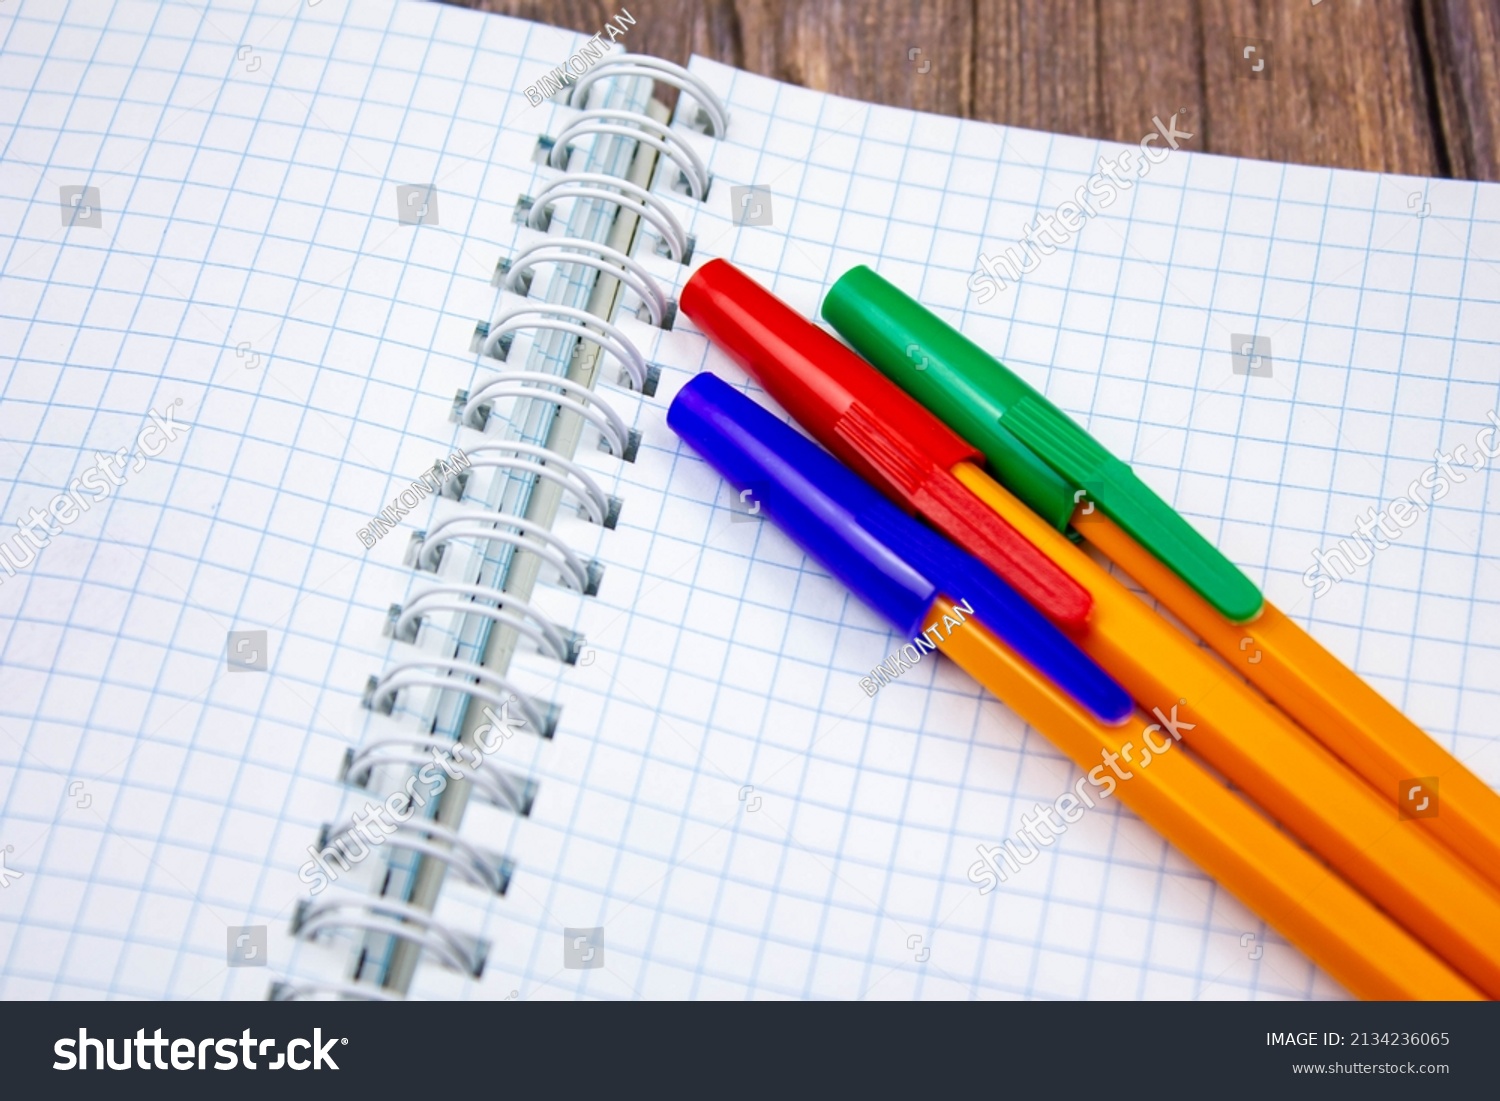 The Ballpoint pens. Choice of handles. Colored pens. Ink pens for writing.Pens lie on the notepad page.Office stationery concept. #2134236065